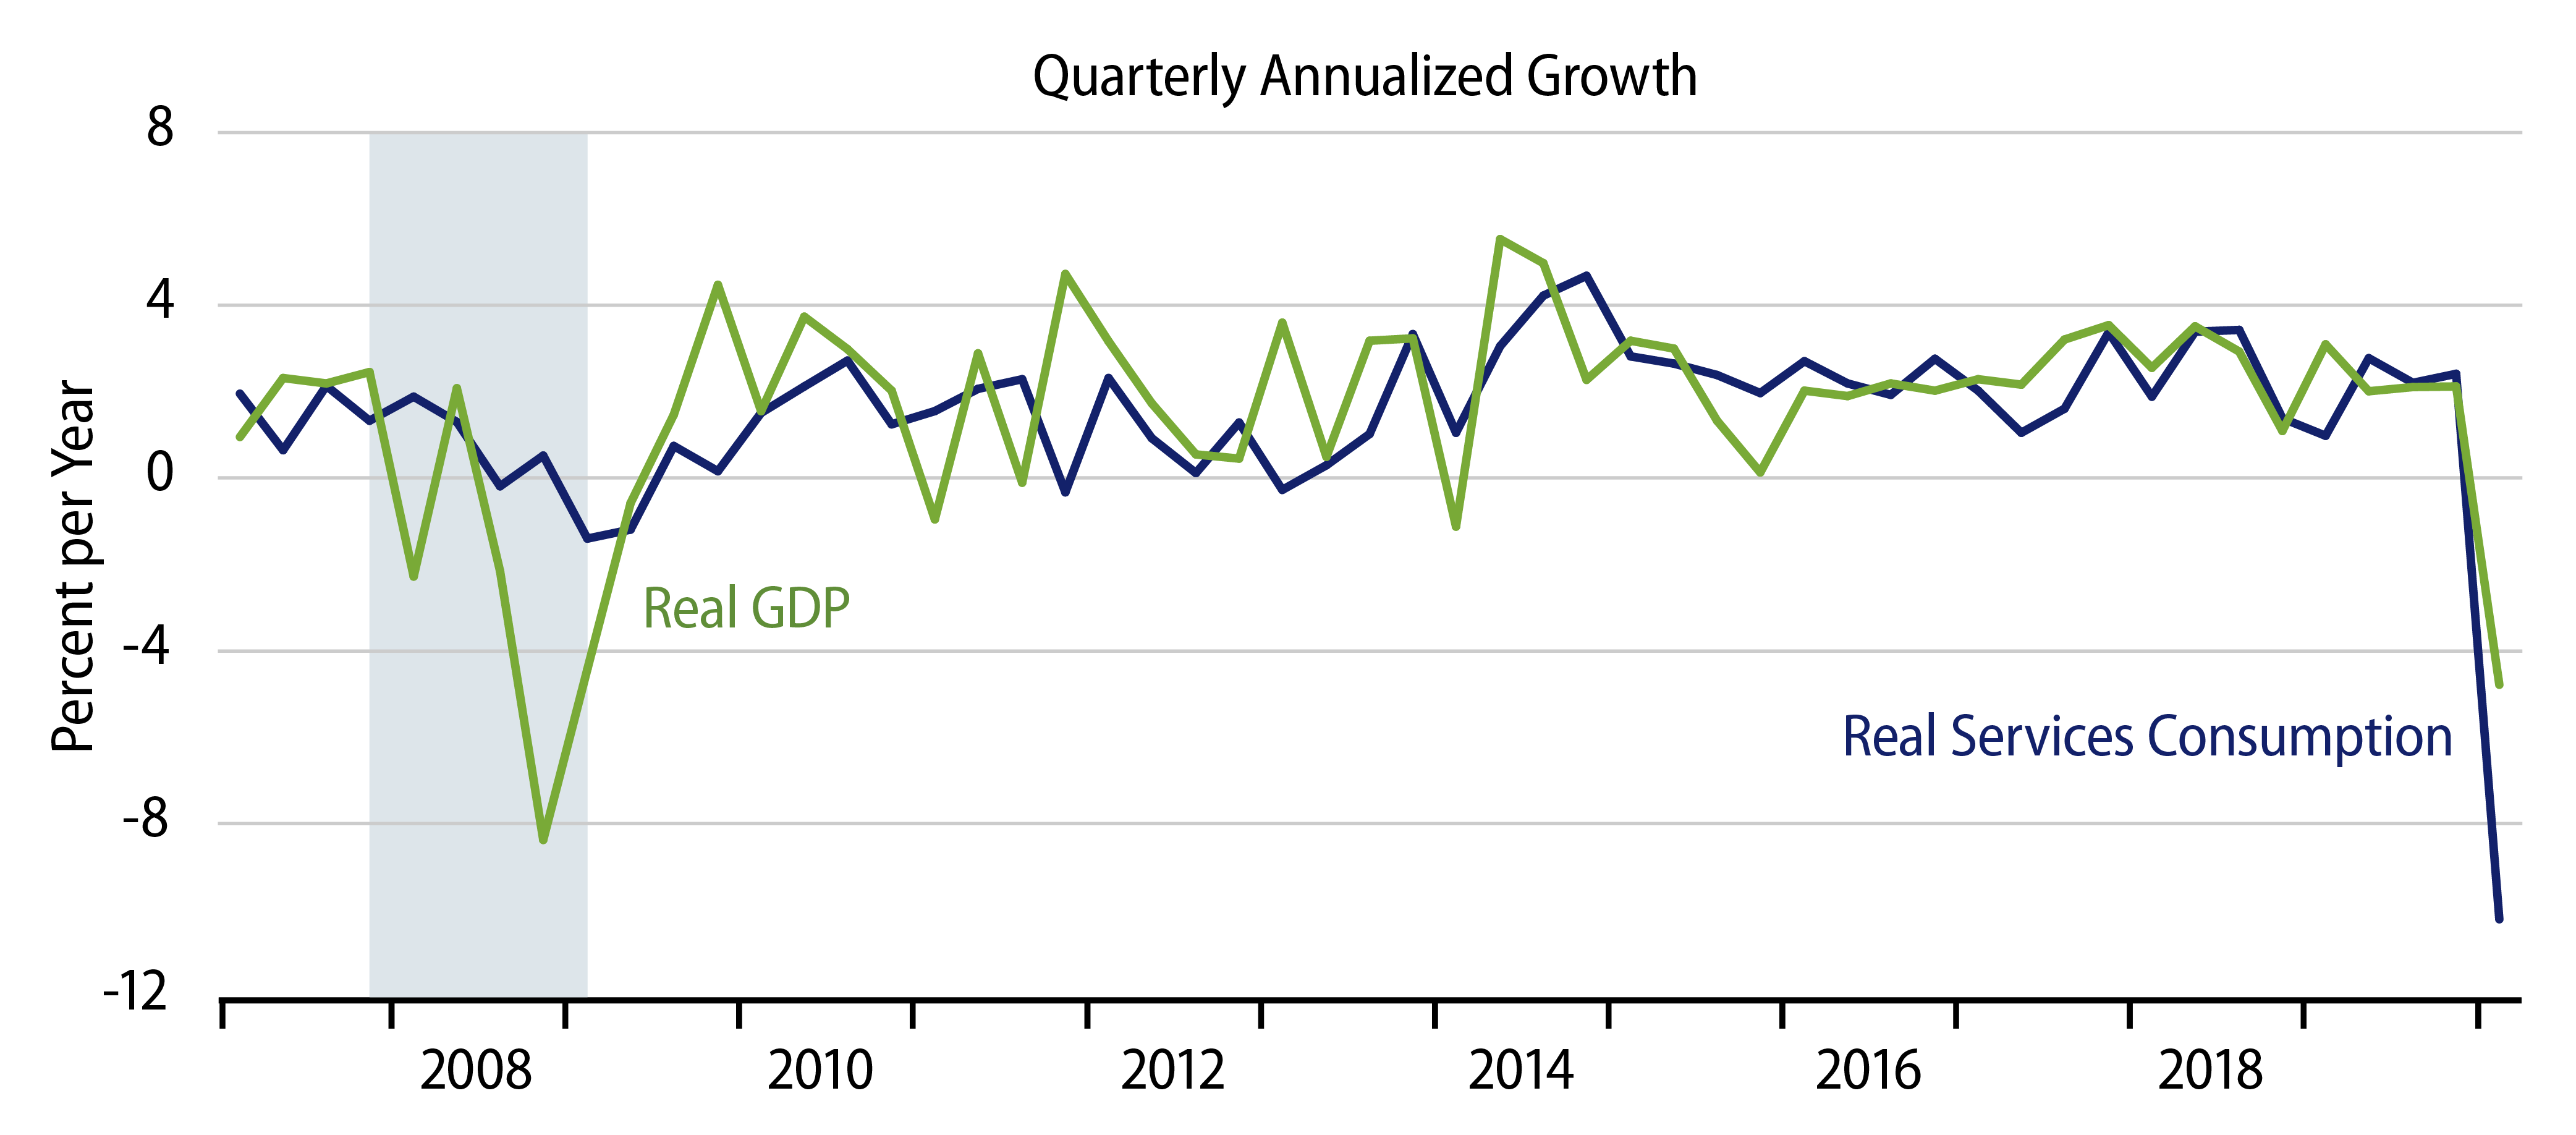 Explore Growth in Real Services Consumption vs. Real GDP